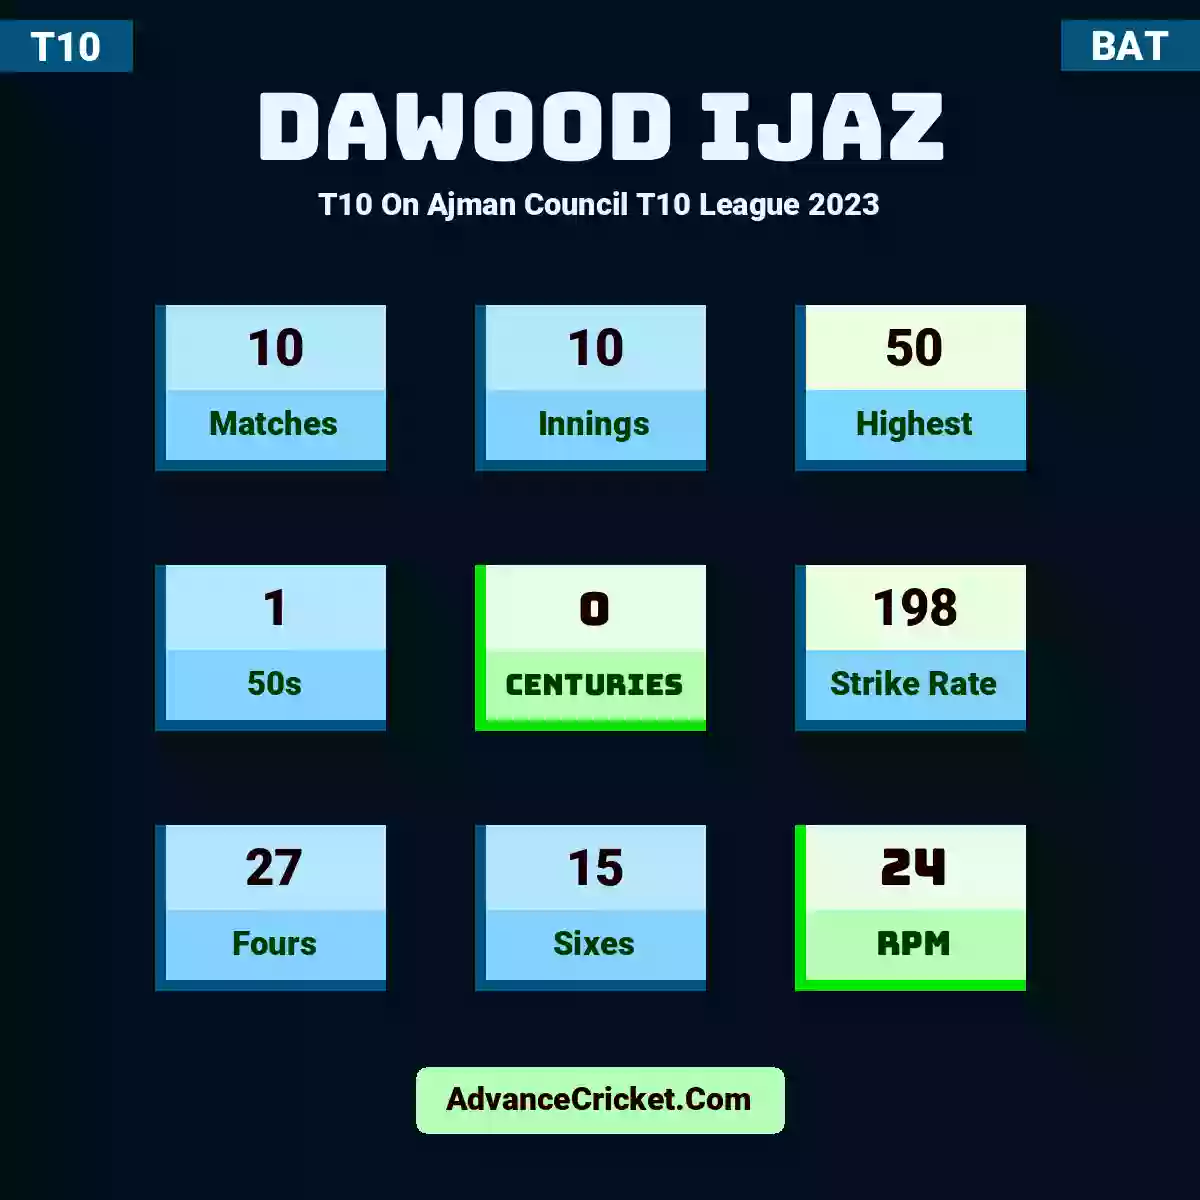 Dawood Ijaz T10  On Ajman Council T10 League 2023, Dawood Ijaz played 10 matches, scored 50 runs as highest, 1 half-centuries, and 0 centuries, with a strike rate of 198. D.Ijaz hit 27 fours and 15 sixes, with an RPM of 24.